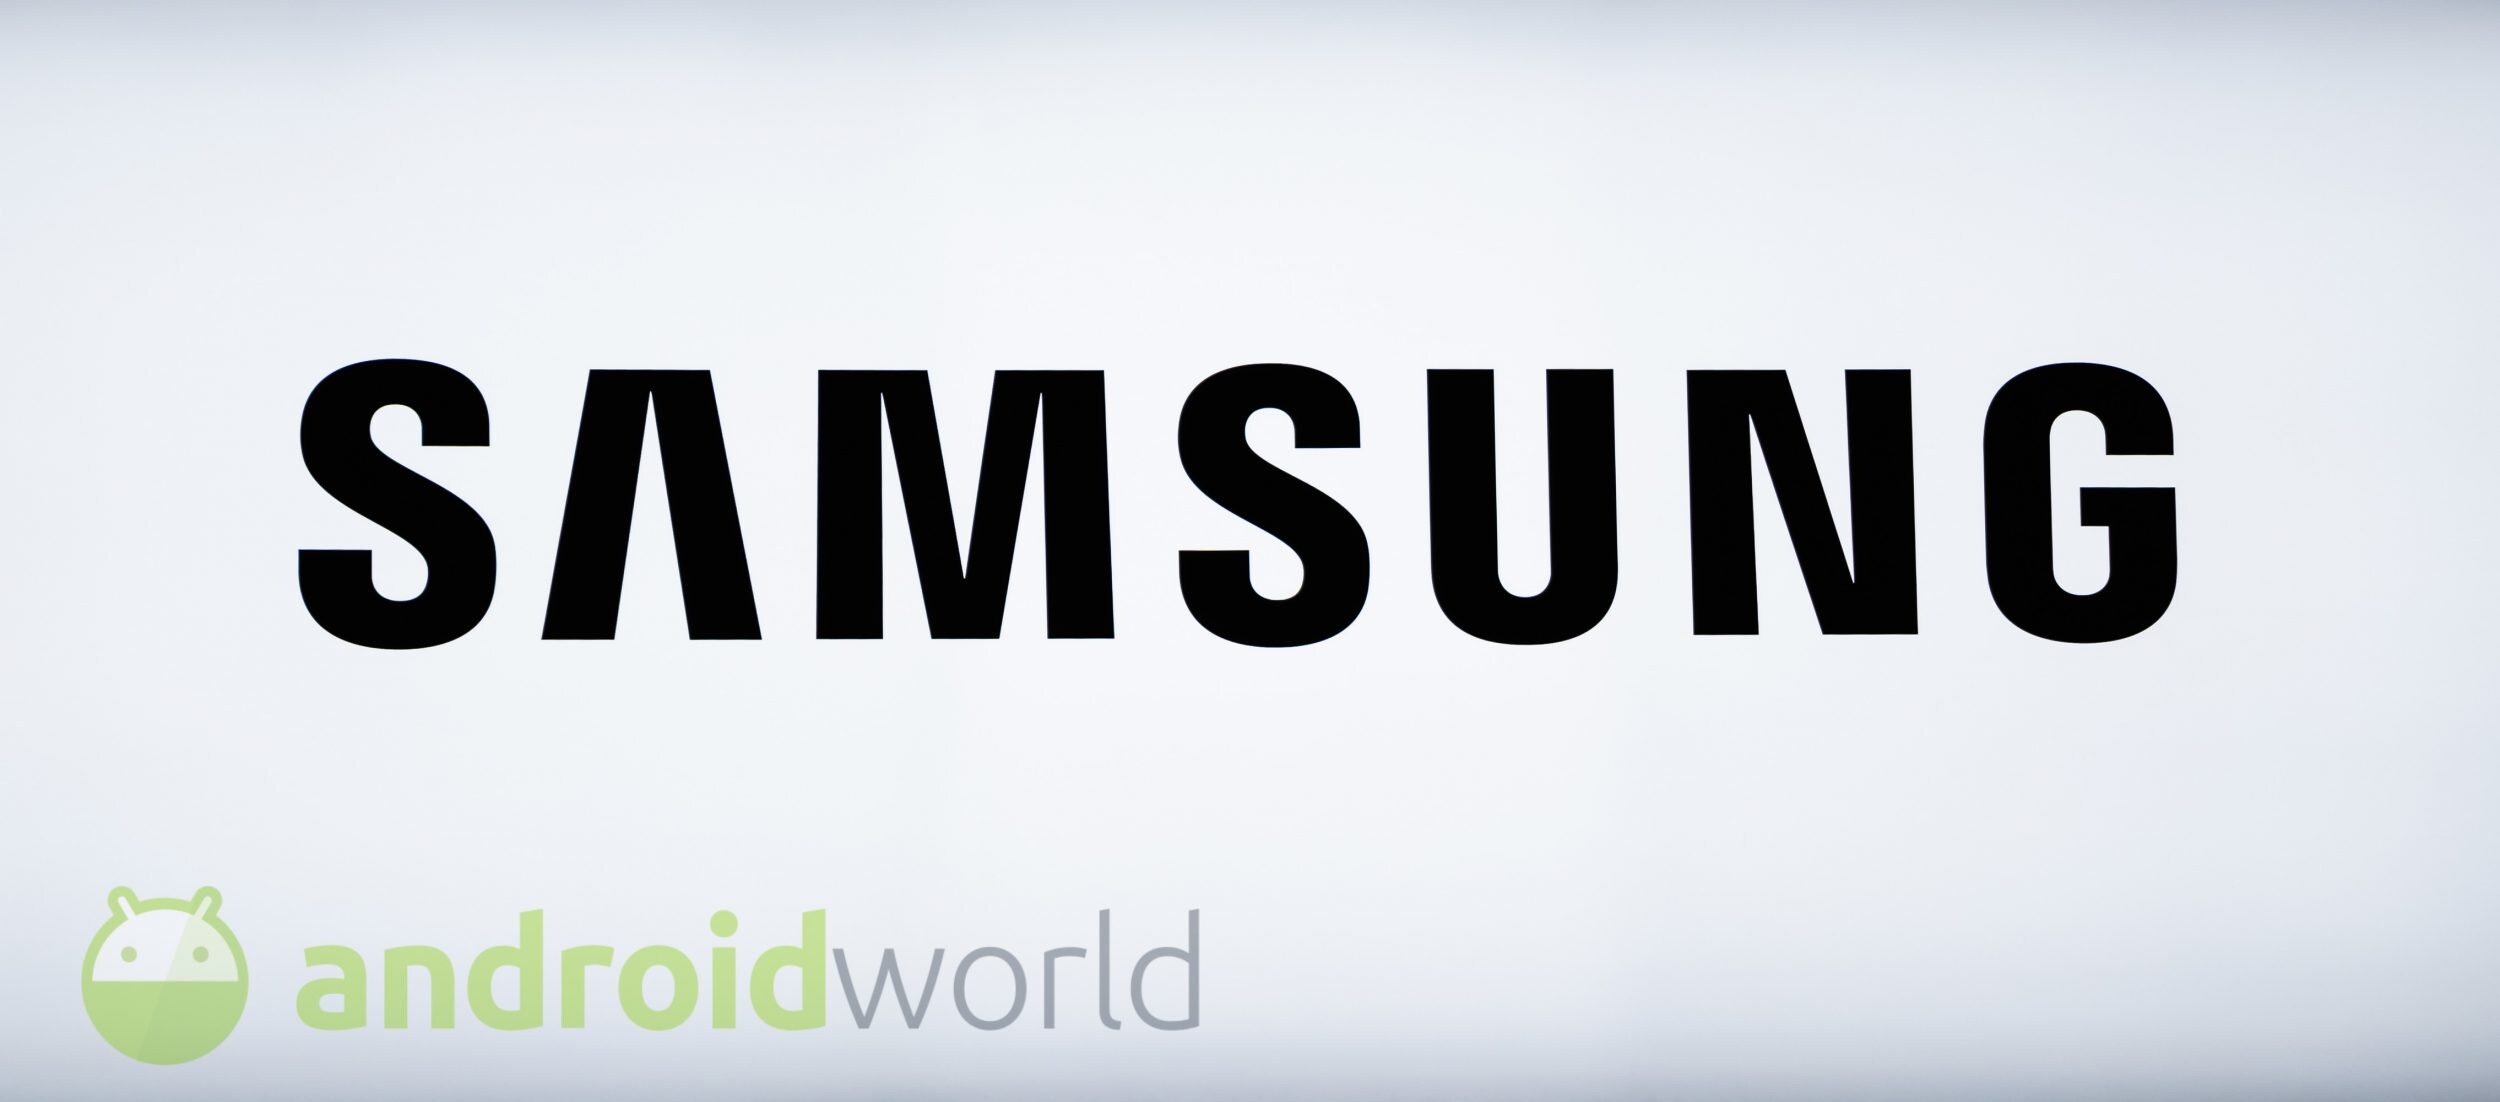 https://www.androidworld.it/wp-content/uploads/2019/11/samsung-2-final-MWC-2019-2500x1102.jpg